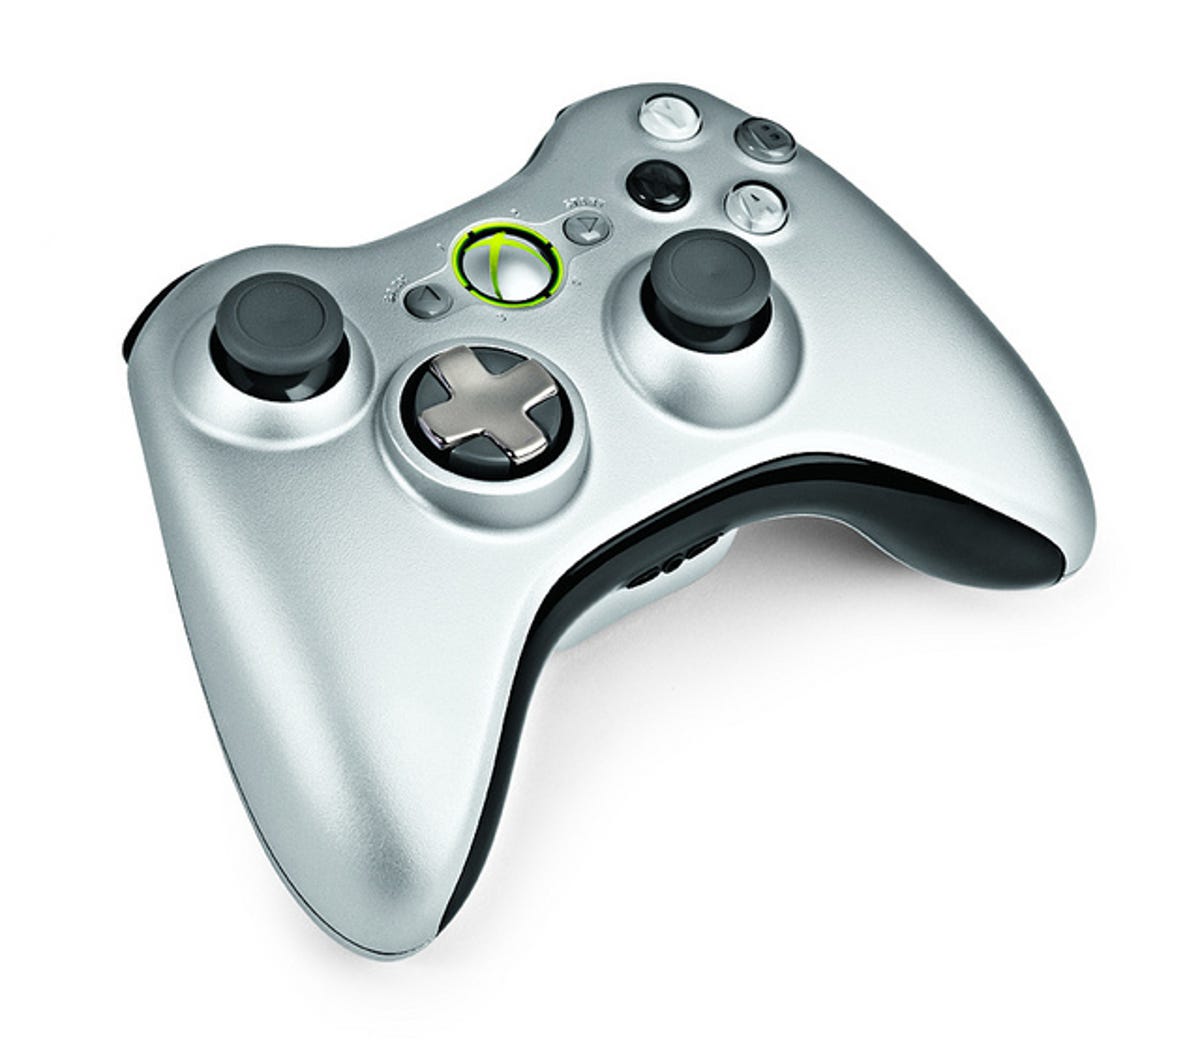 The new wireless Xbox 360 controller.